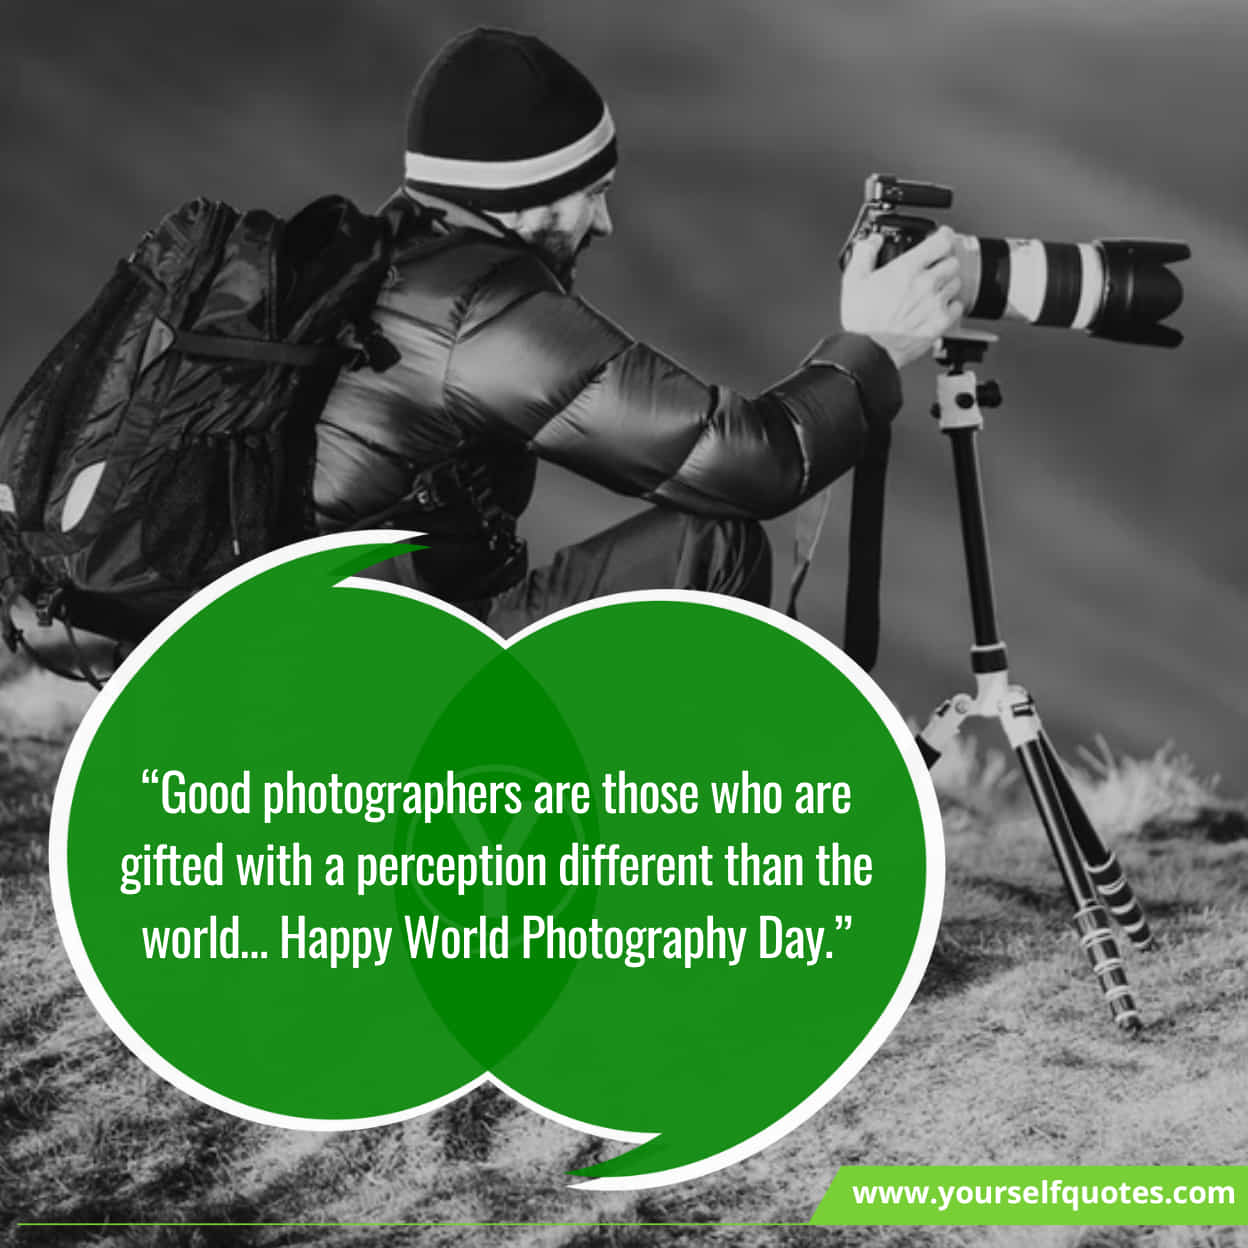 World Photography Day Messages & Slogans